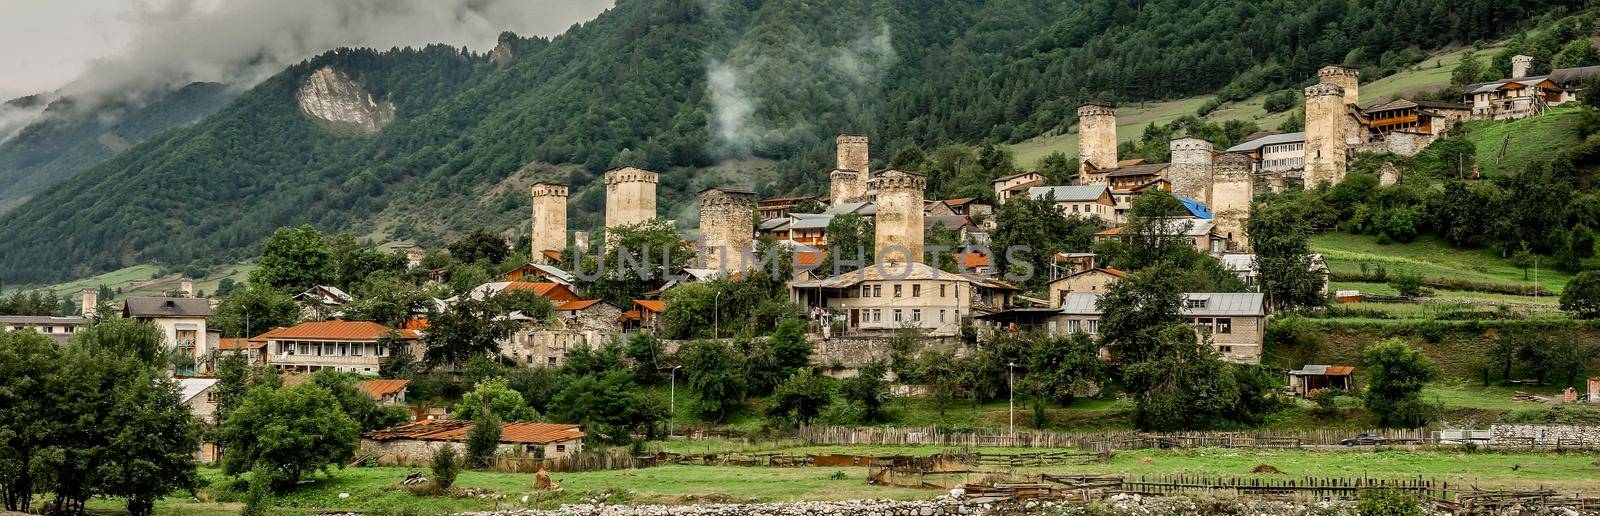 Pamorama of picturesque Mestia village in Svaneti region, Georgia. Green dense forest and mountaons covered with fog